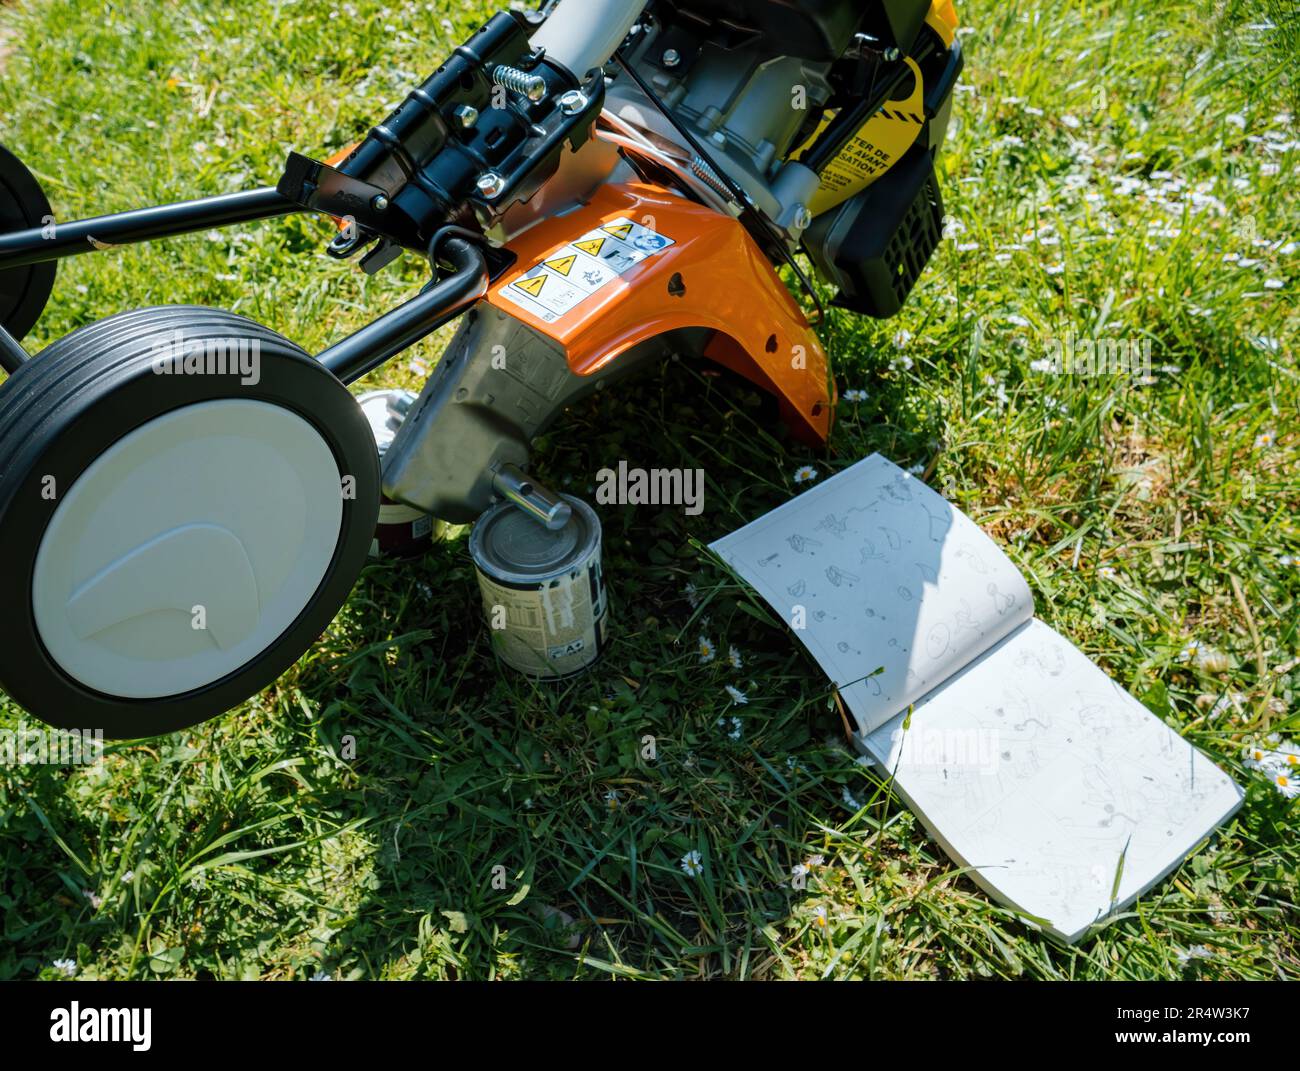 Frankfurt, Germany - May 3, 2023: A technician carefully assembles a Stihl Tiller MH 585 in a green garden, reading the manual to utilize this versati Stock Photo